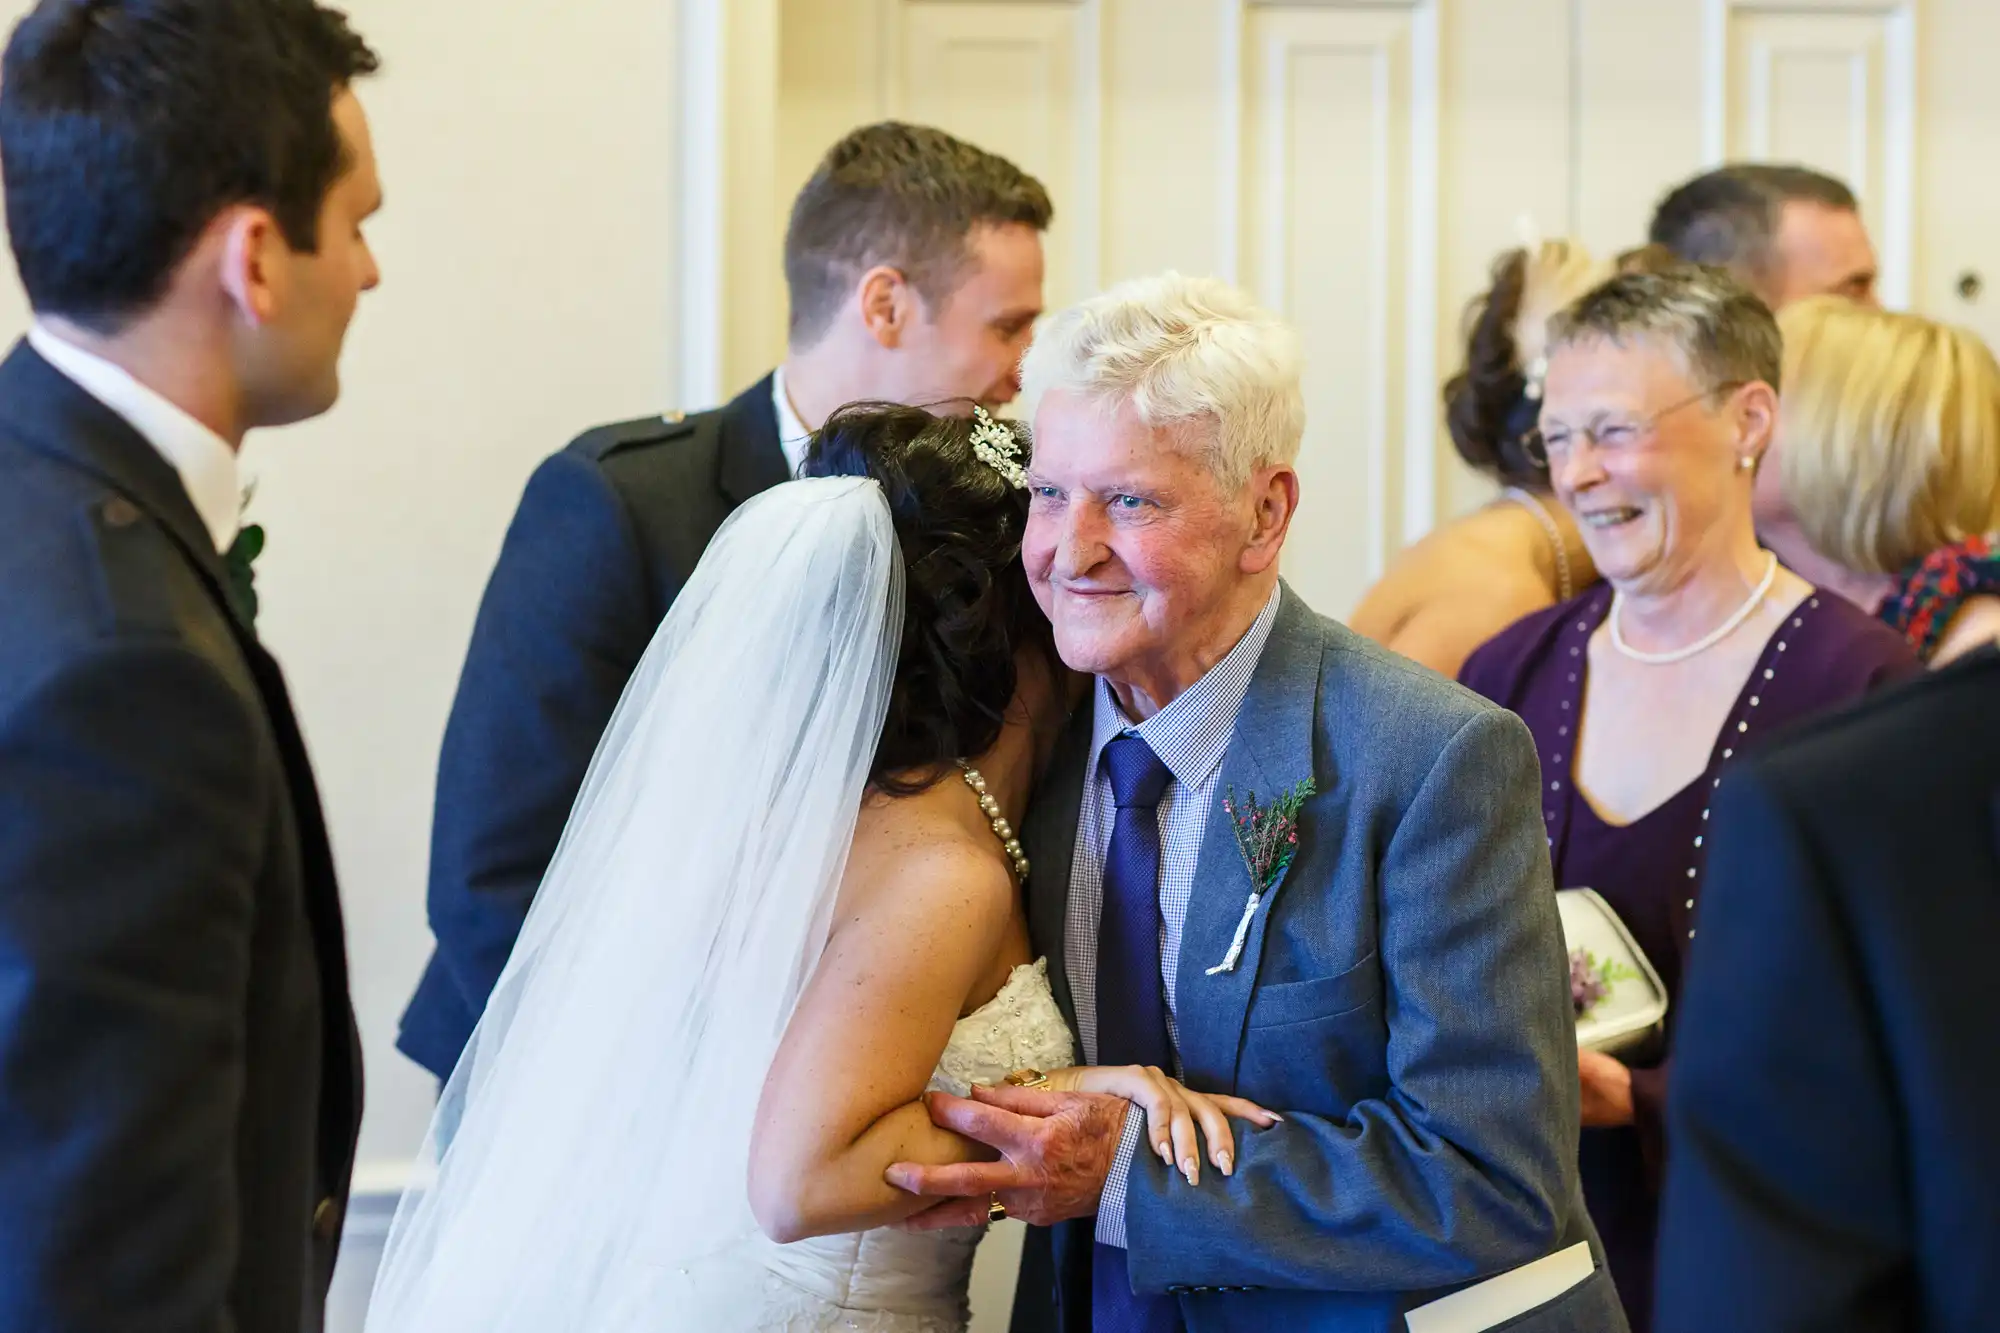 An elderly man in a blue suit embraces a smiling bride at a wedding ceremony, surrounded by guests.